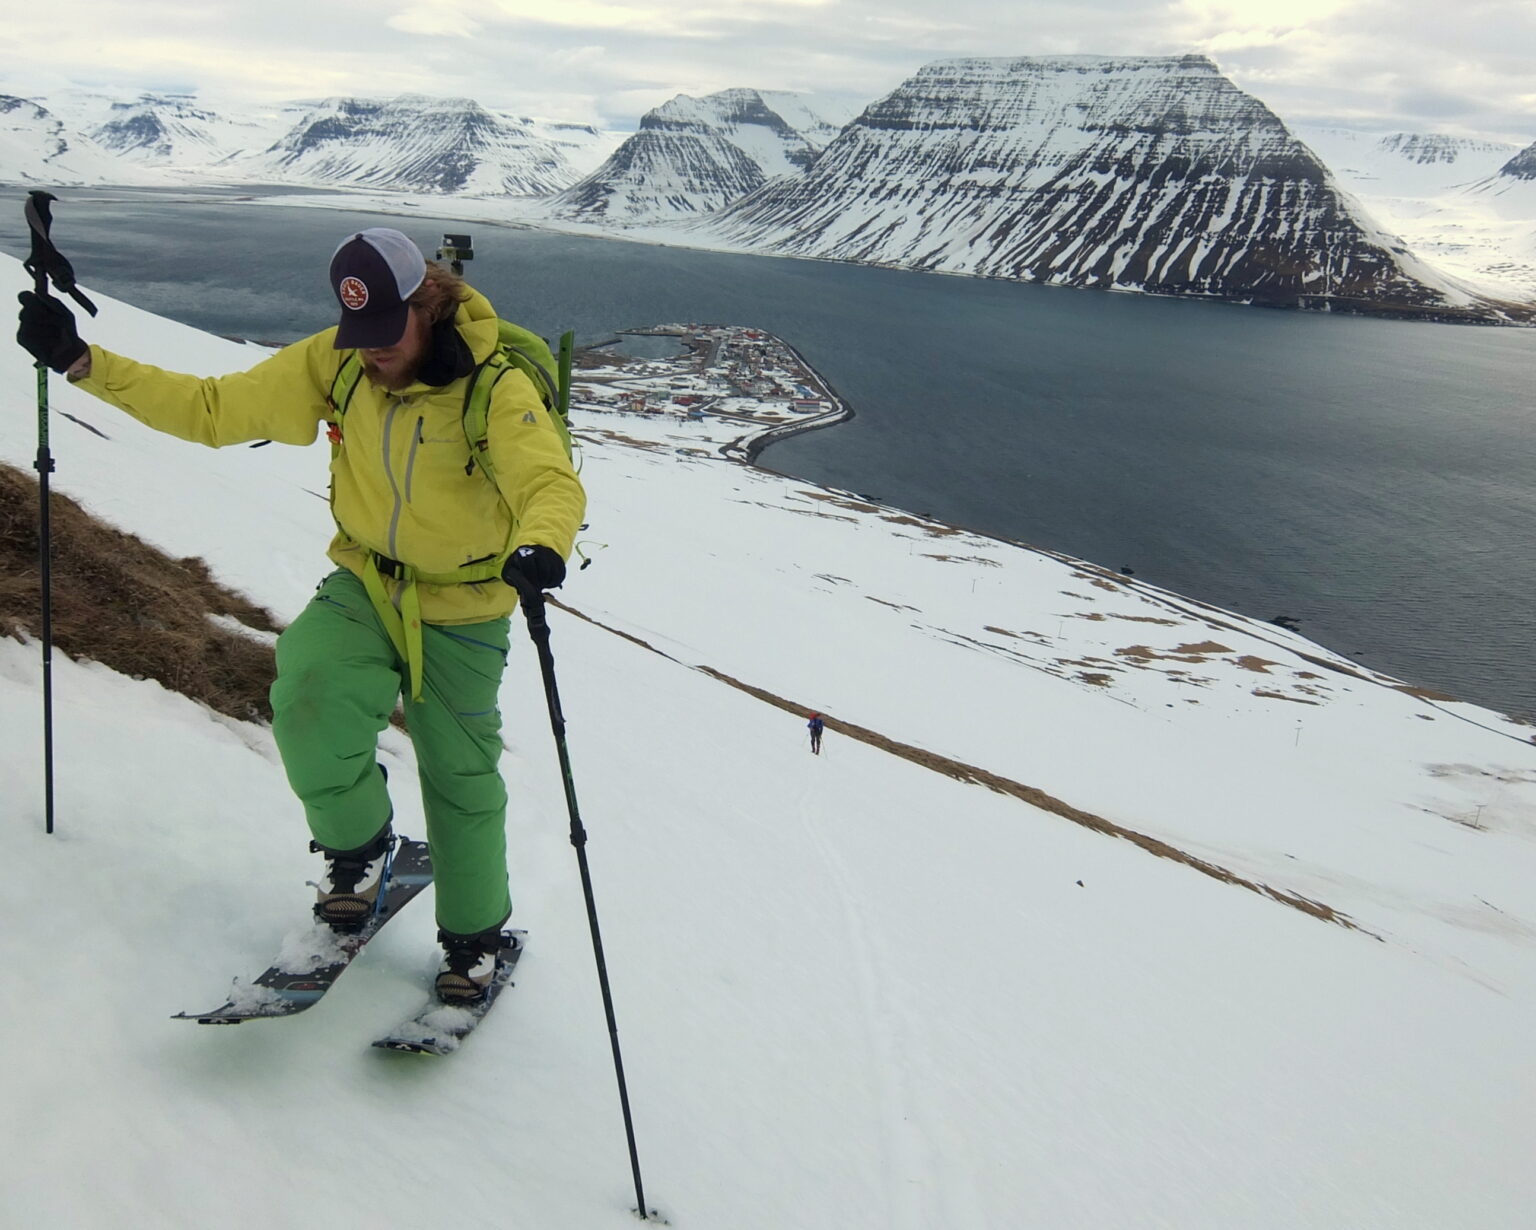 Ski touring up the South Couloir of Eyrarfjall